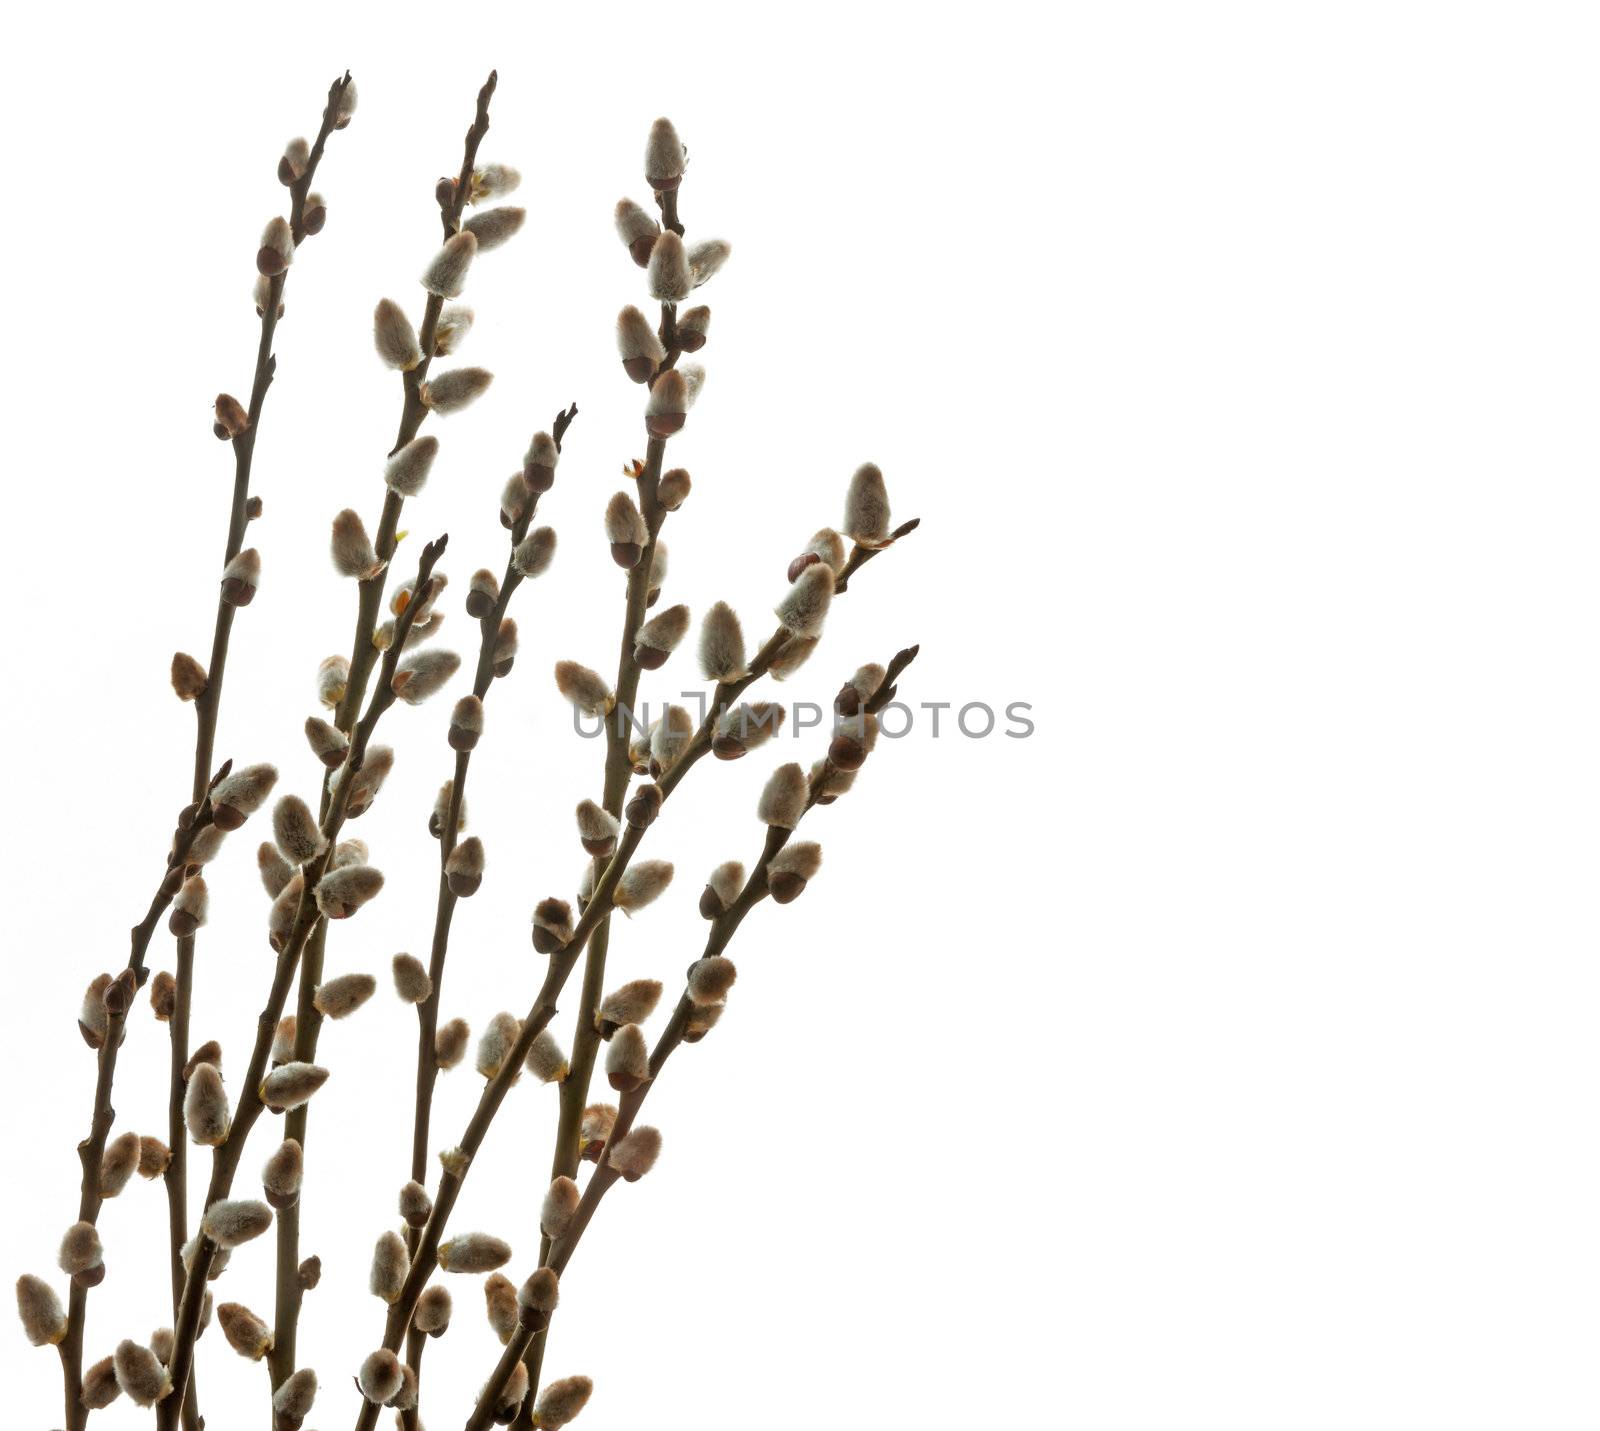 Willow branches on a white background